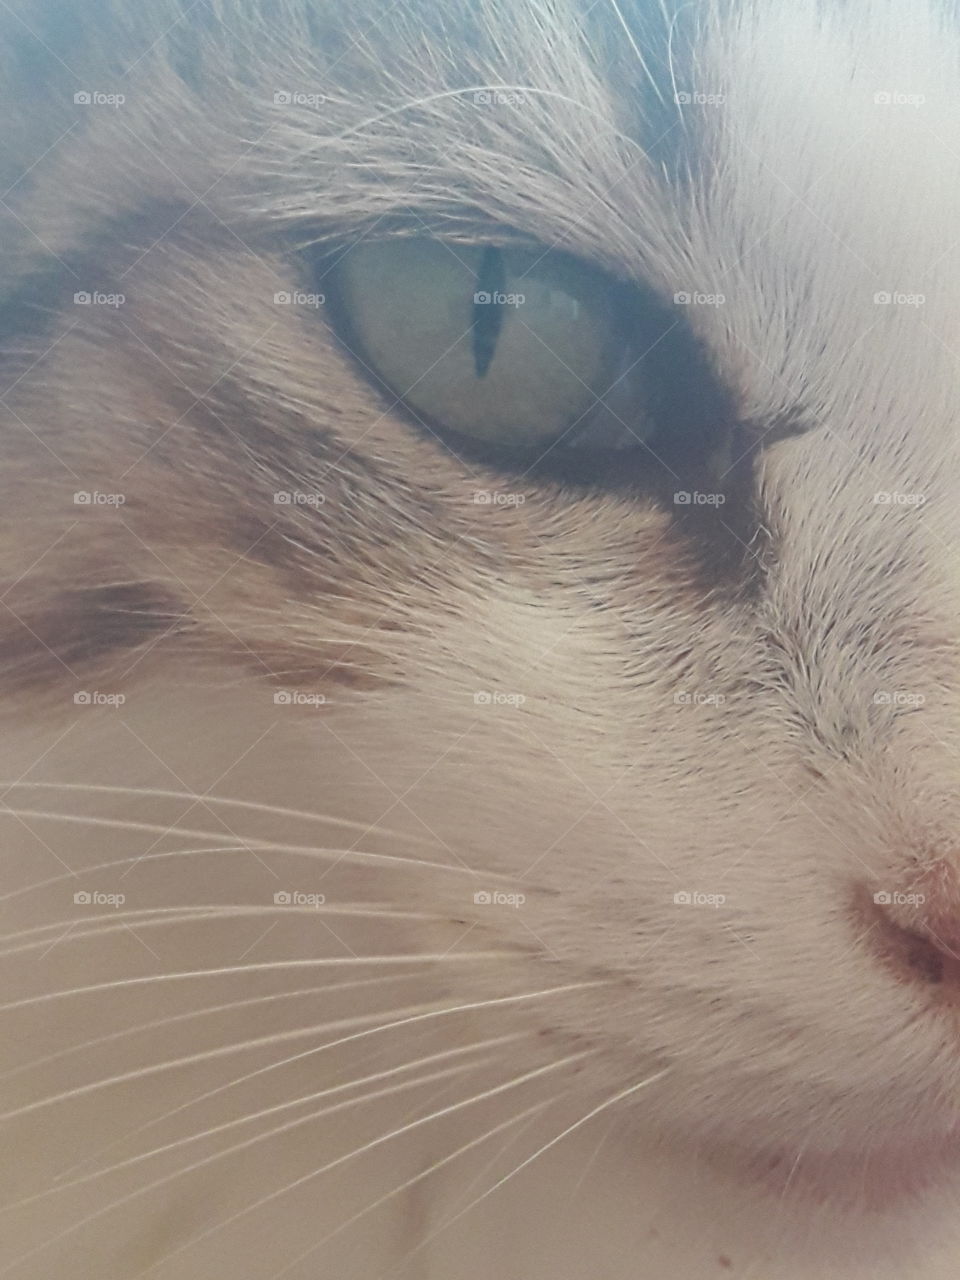 very close to the cat's face